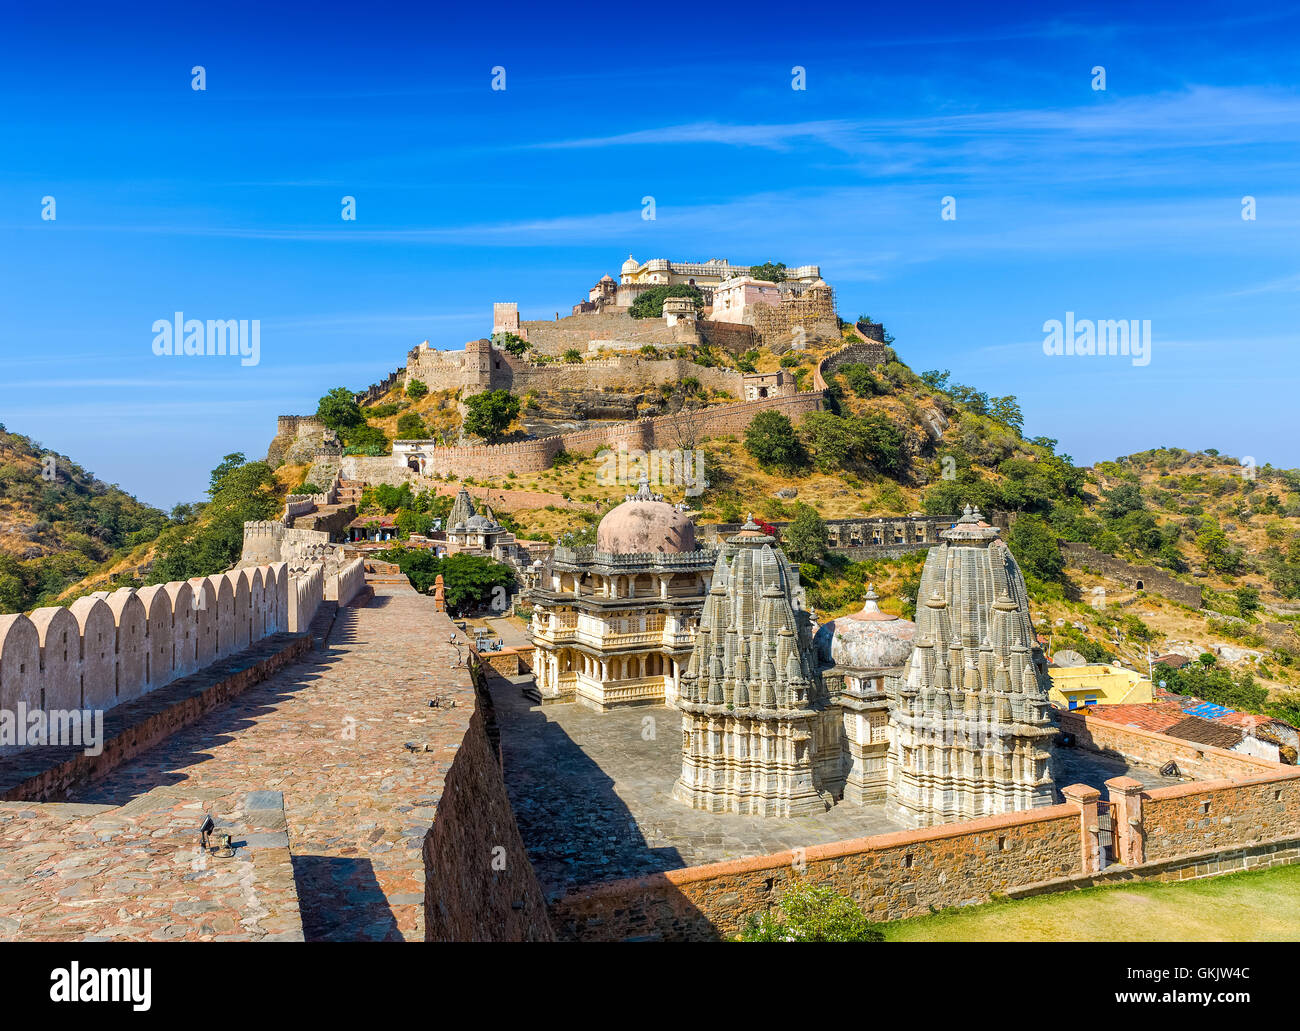 Kumbhalgarh fort, Rajasthan, India.  Kumbhalgarh is a Mewar fortress in the Rajsamand District of Rajasthan state in western Ind Stock Photo